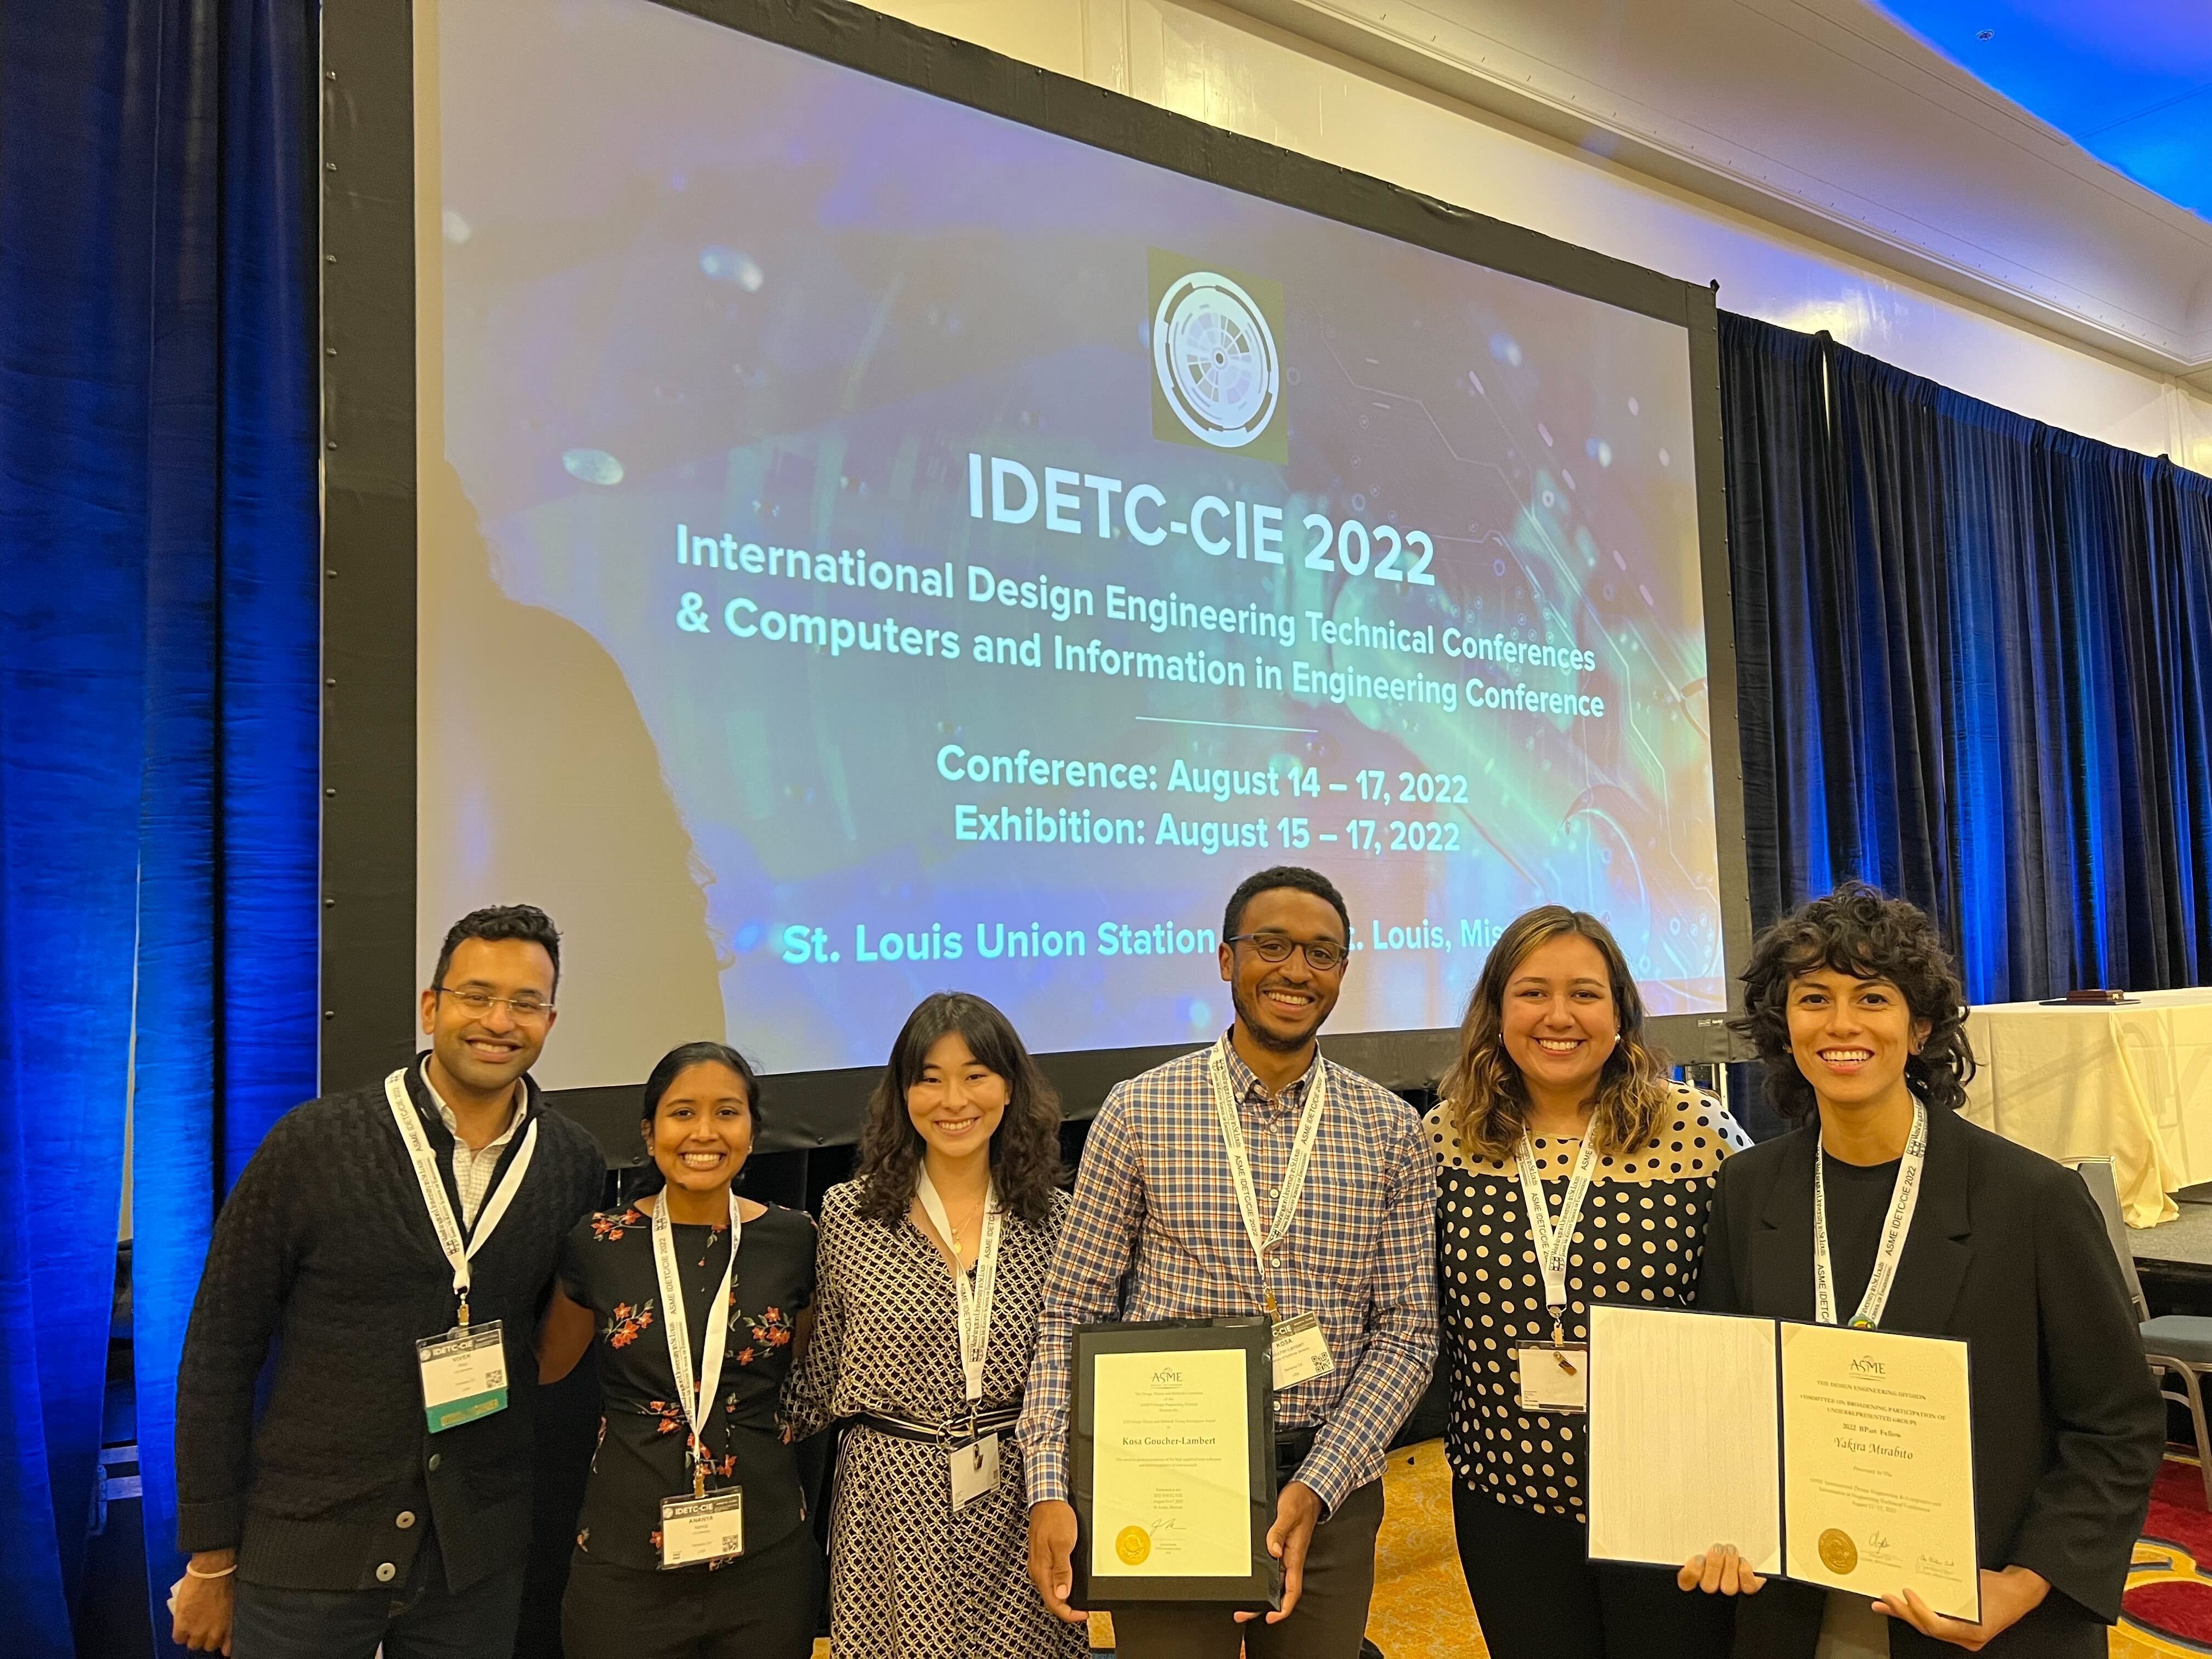 Vivek, Ananya, Elisa, Kosa, holding award, Nicole, and Yakira, holding certificate, in front of screen with IDETC conference title